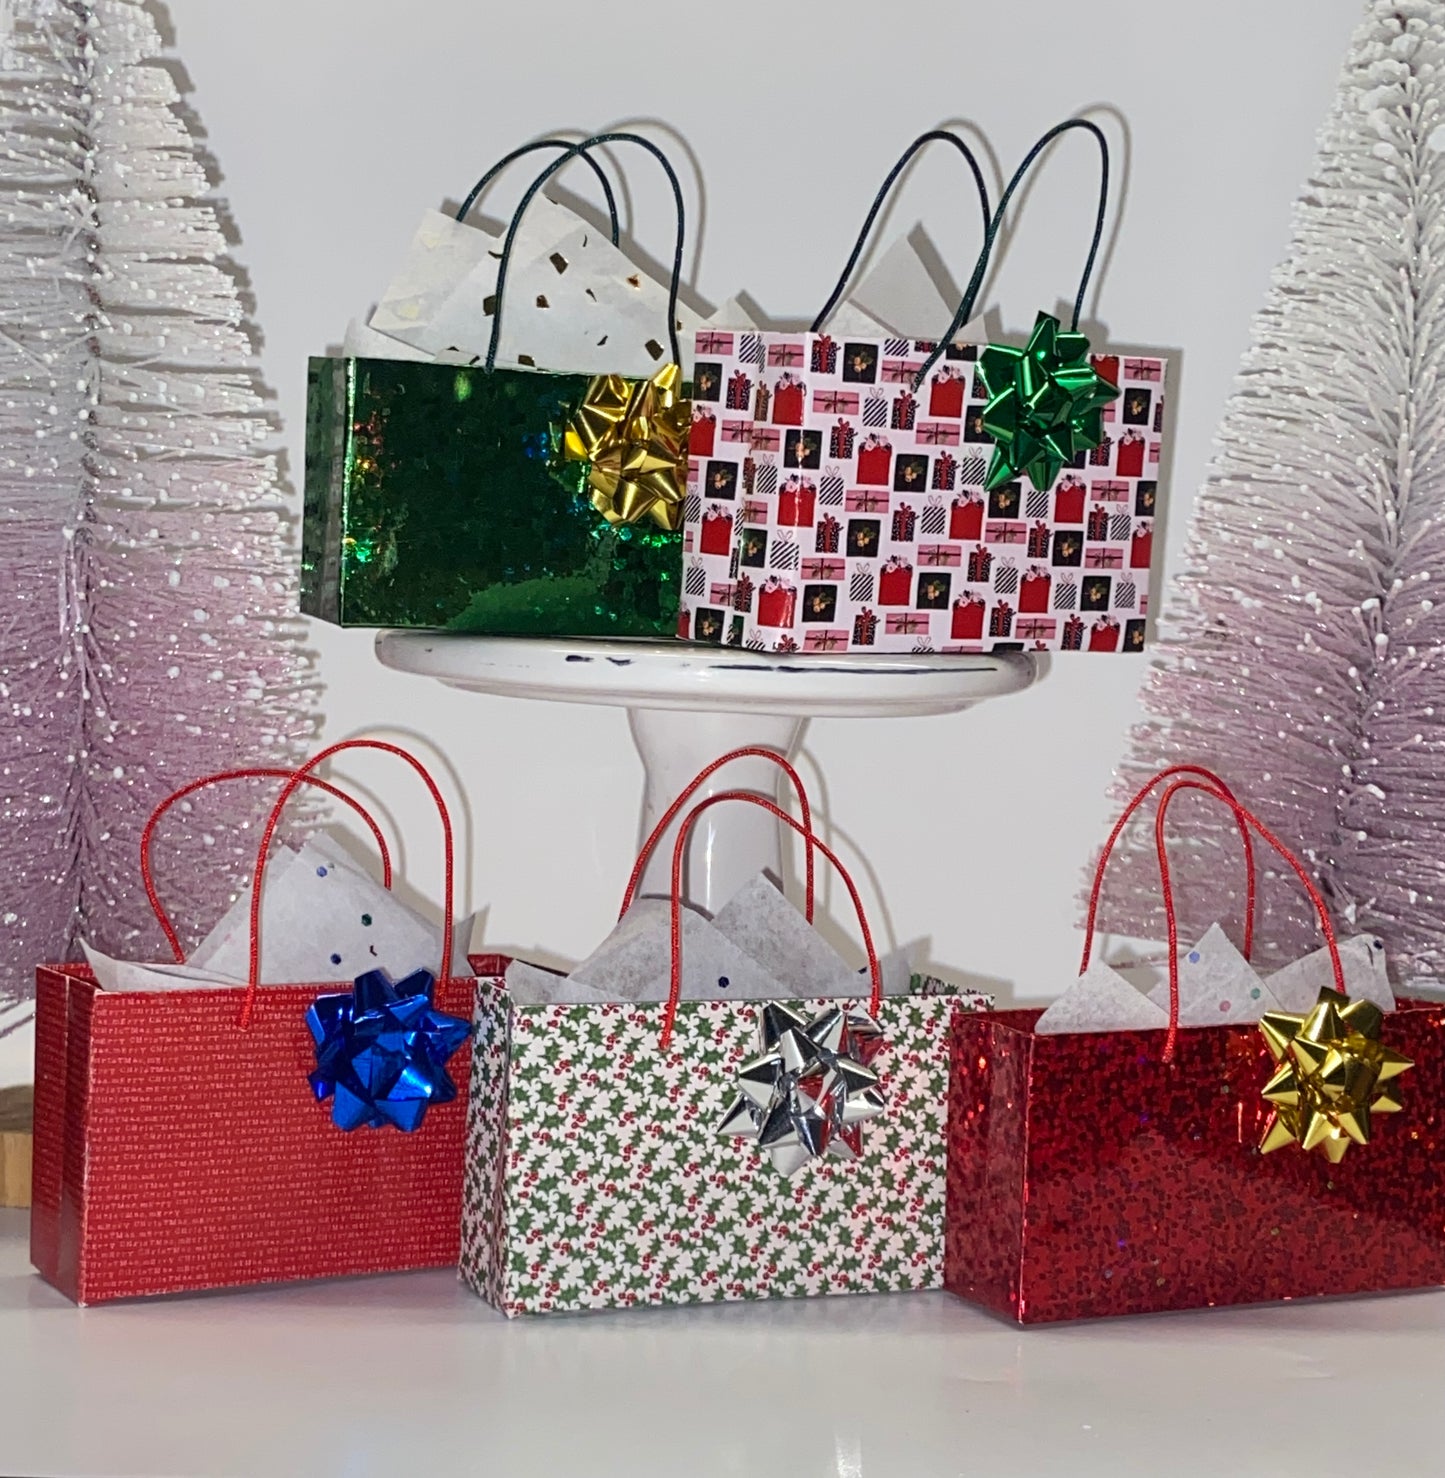 MINIATURE HOLIDAY SHOPPING BAGS FOR FASHION DOLLS